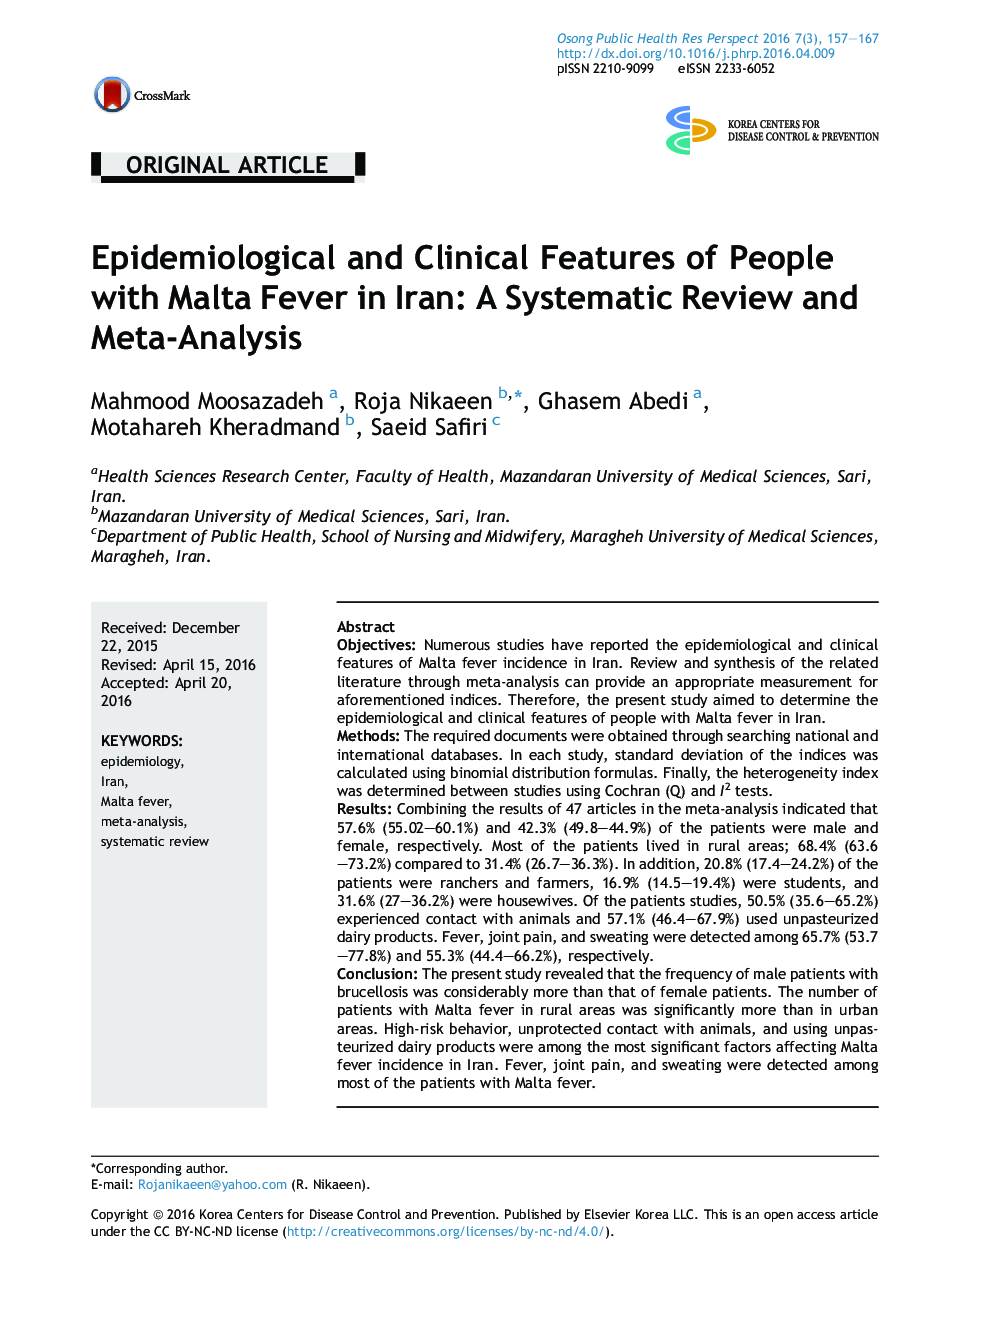 Epidemiological and Clinical Features of People with Malta Fever in Iran: A Systematic Review and Meta-Analysis